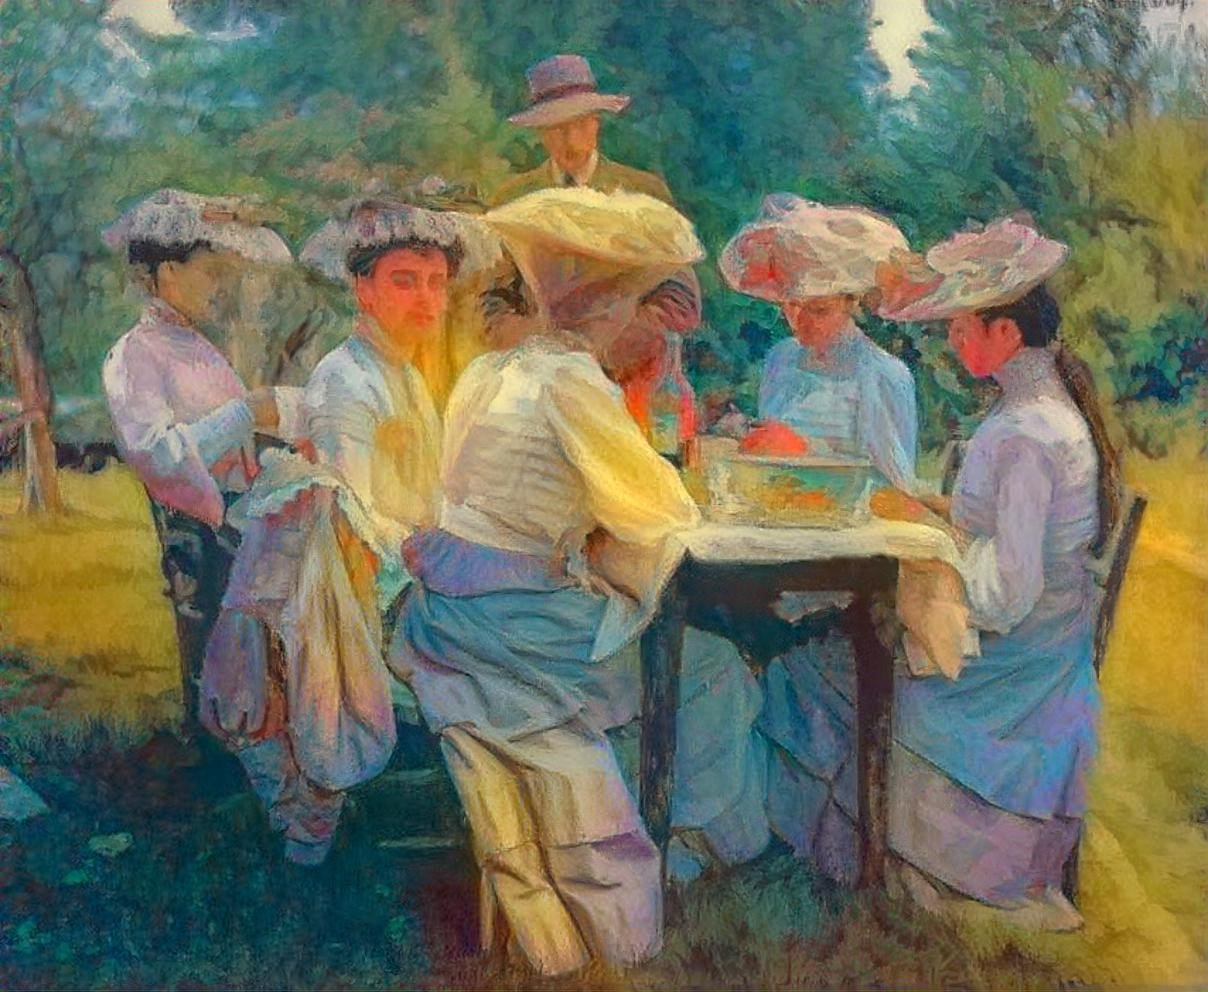 Picnic on a mid-summer evening